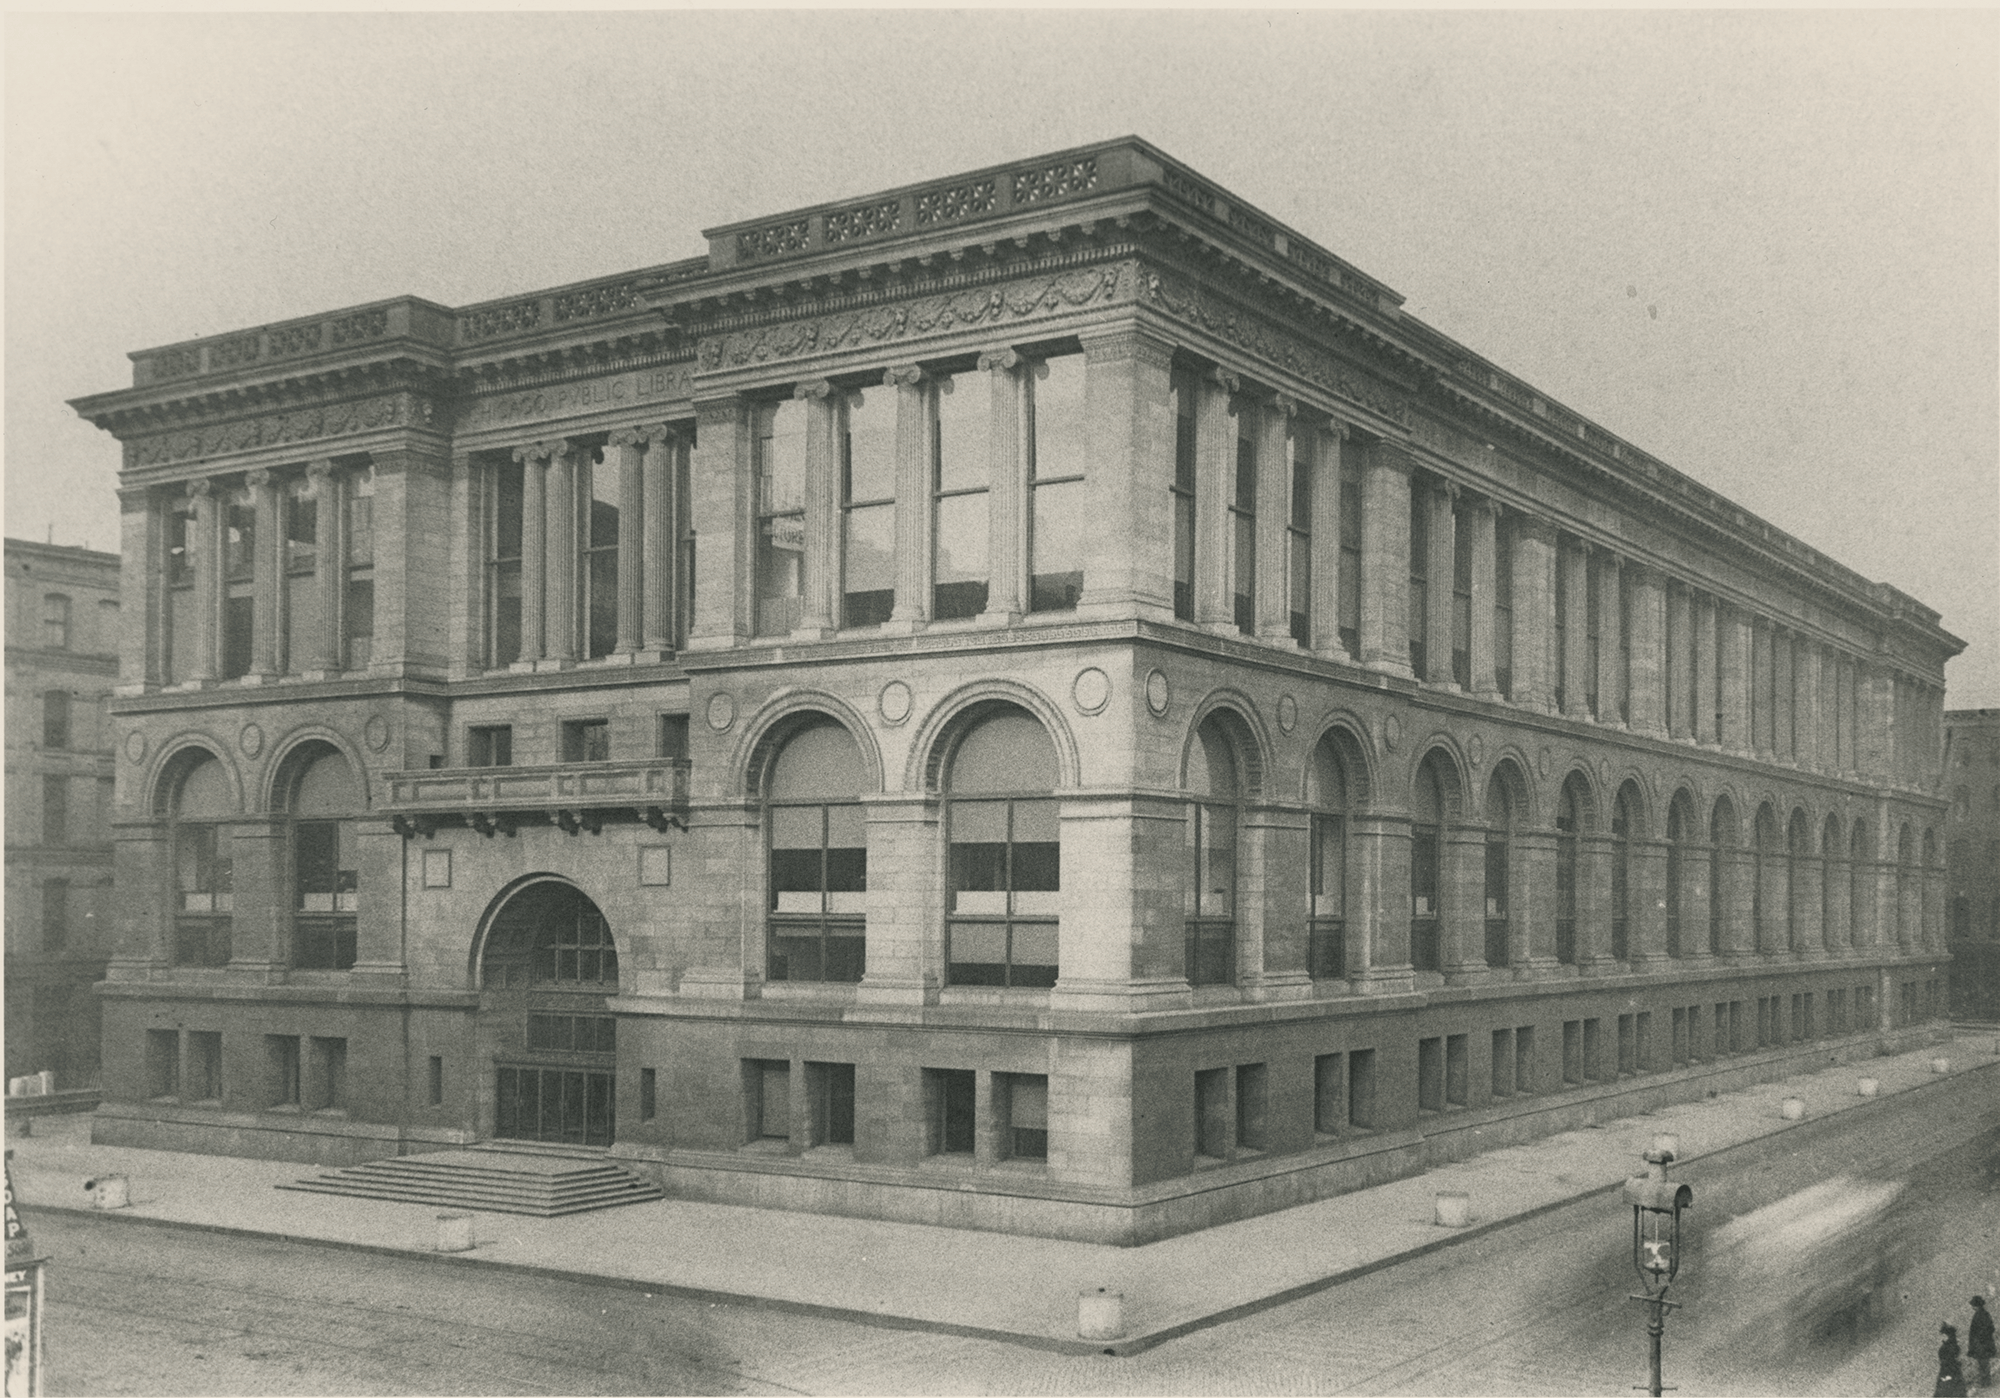 Circa 1897, the CPL Central Library on Michigan Ave.